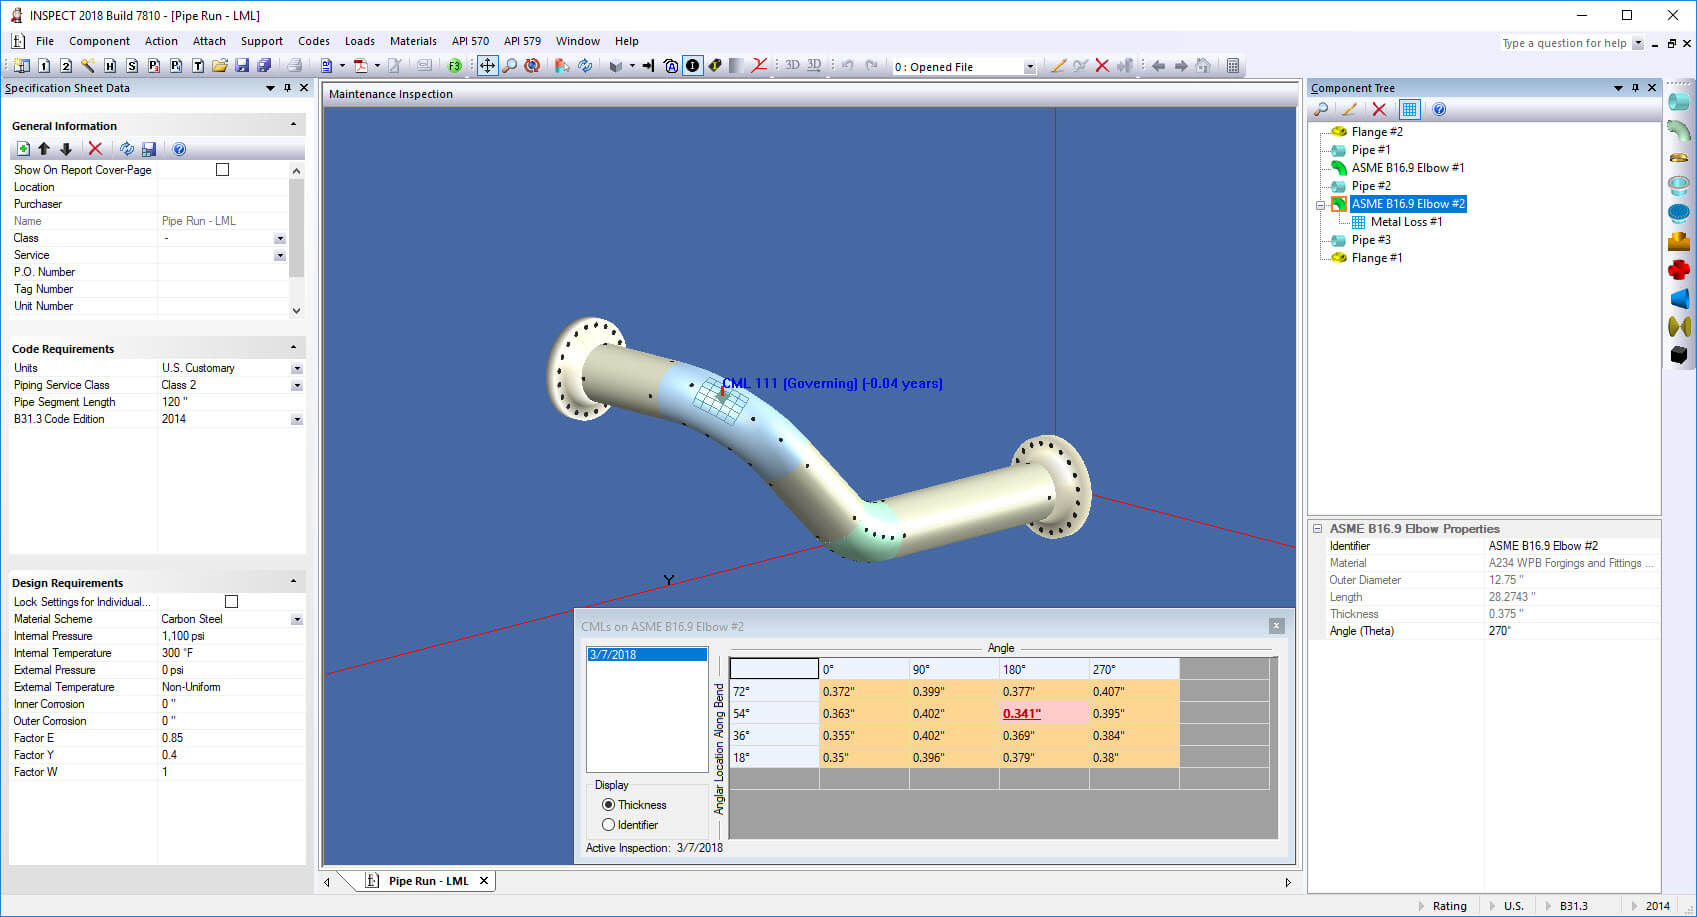 INSPECT Performs API 579-1 Fitness-for-Service Assessments on Piping as Allowed by API 570